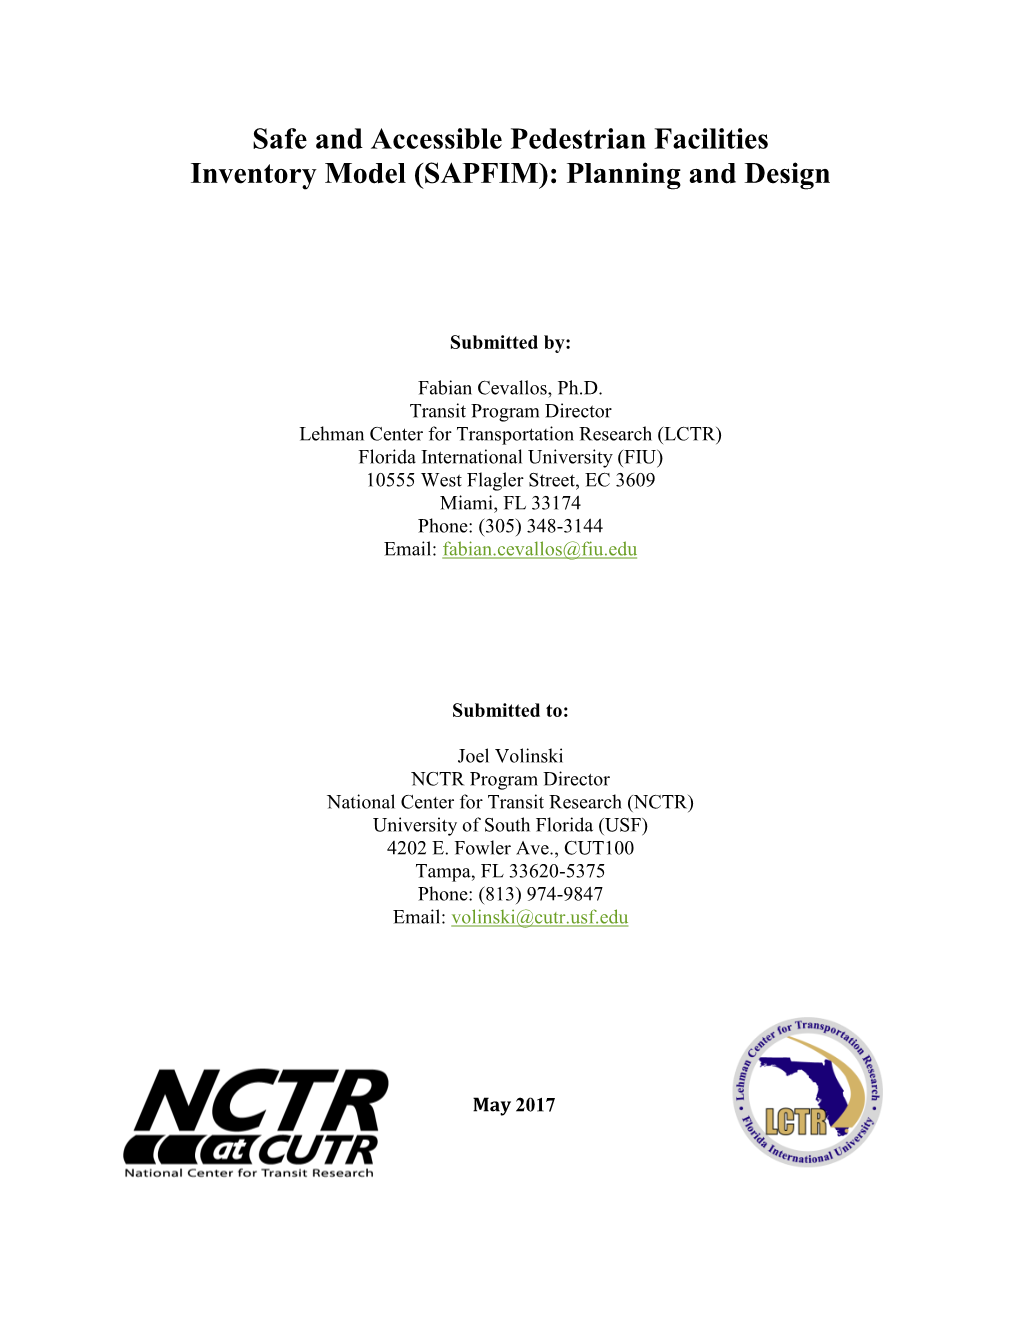 Safe and Accessible Pedestrian Facilities Inventory Model (SAPFIM): Planning and Design